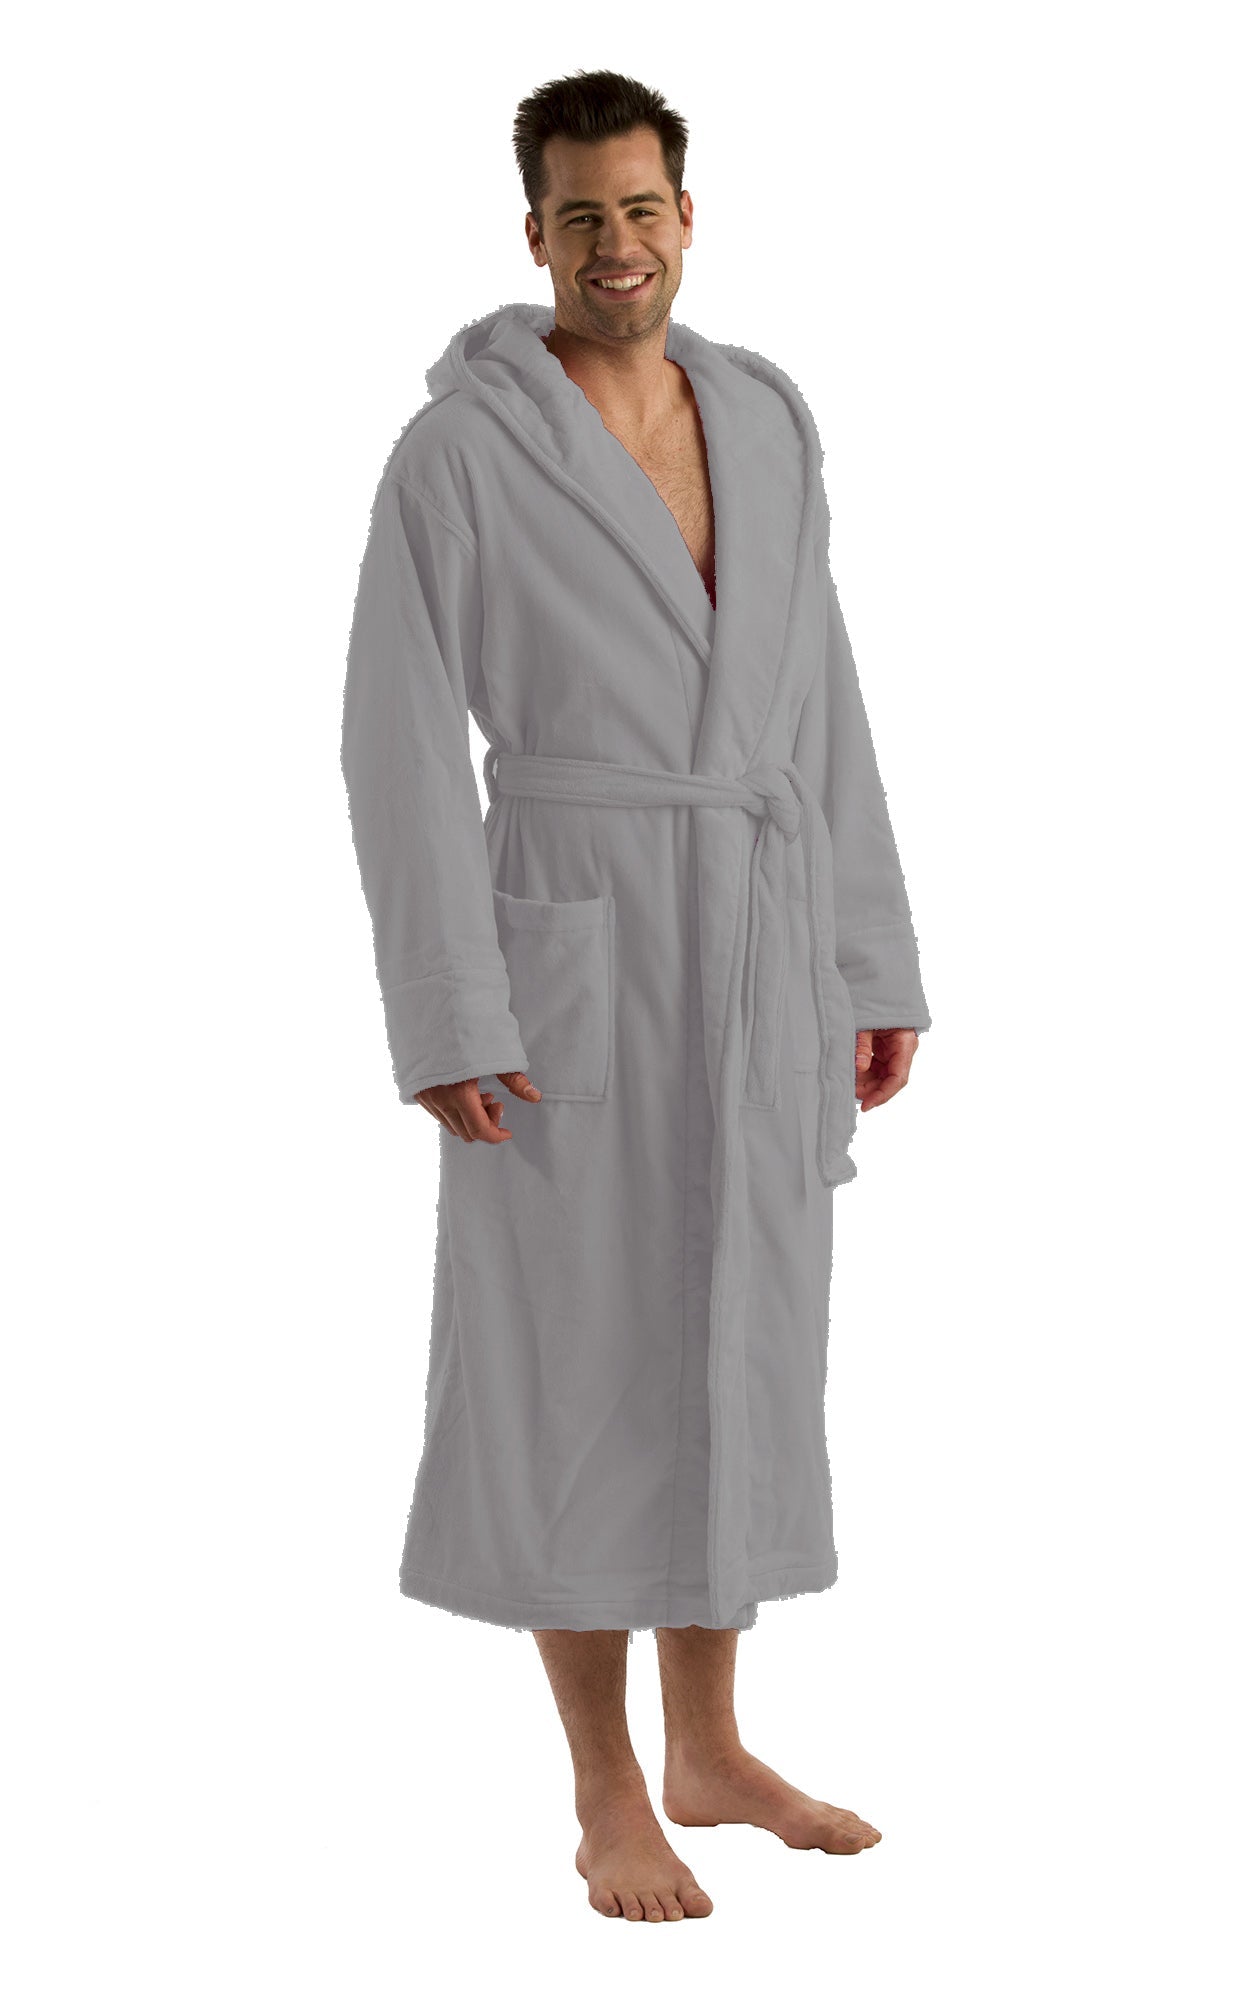  BY LORA Hooded Sweatshirt Bathrobe Polyester Blended Cotton Robe  for Men and Women, GRAY,S/M Size : Clothing, Shoes & Jewelry